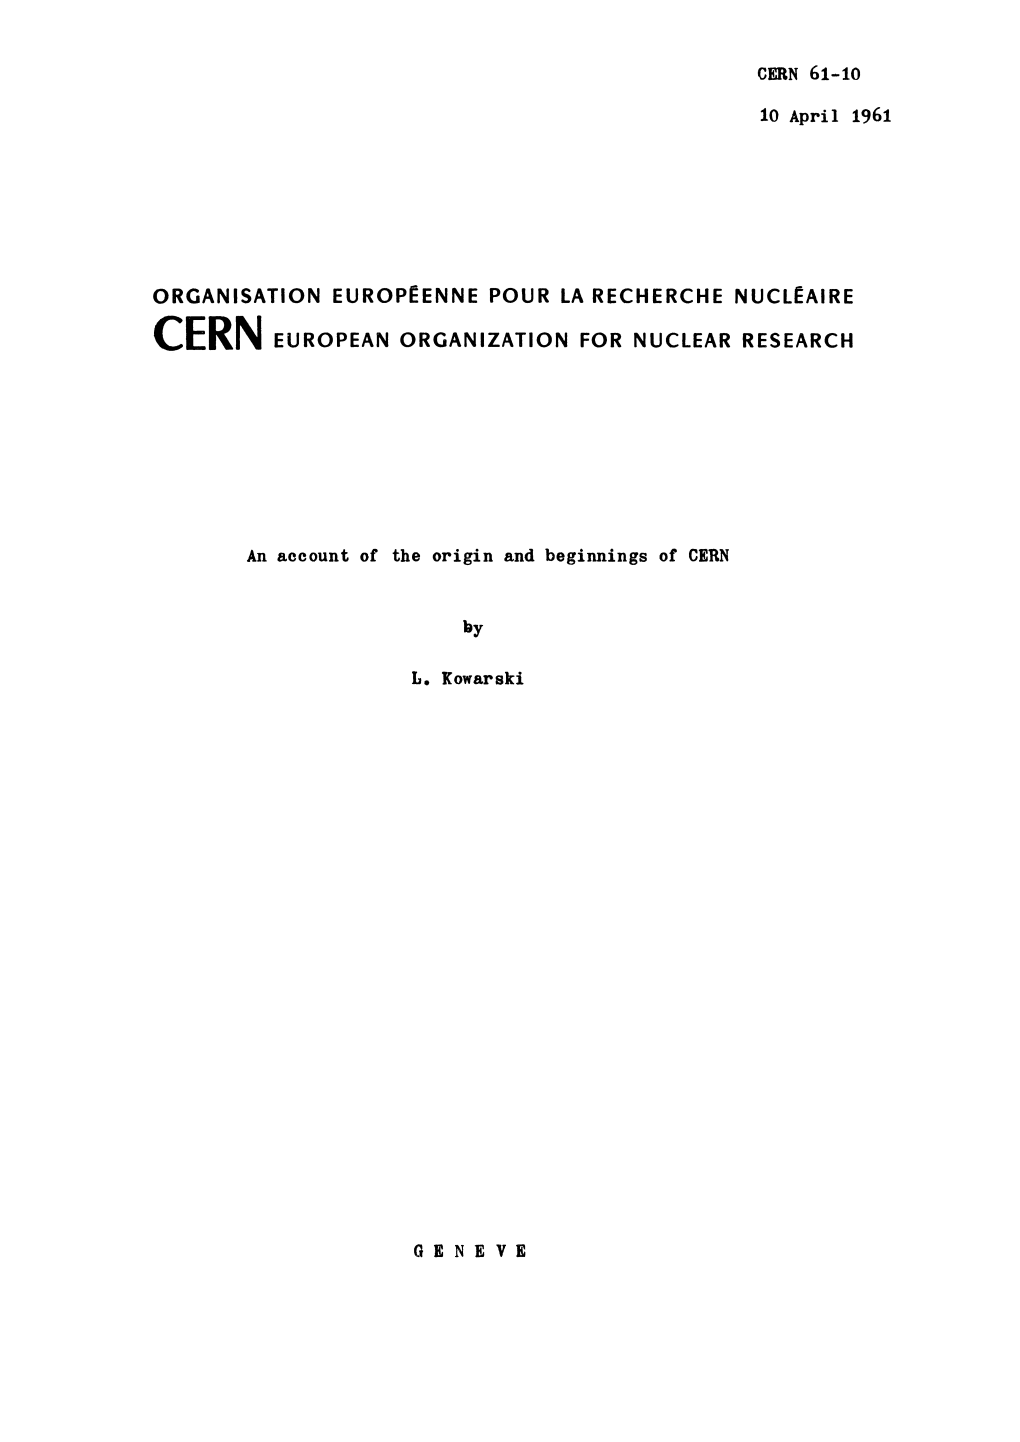 CERN 61-10 10 April 1961 an Account Or the Origin And